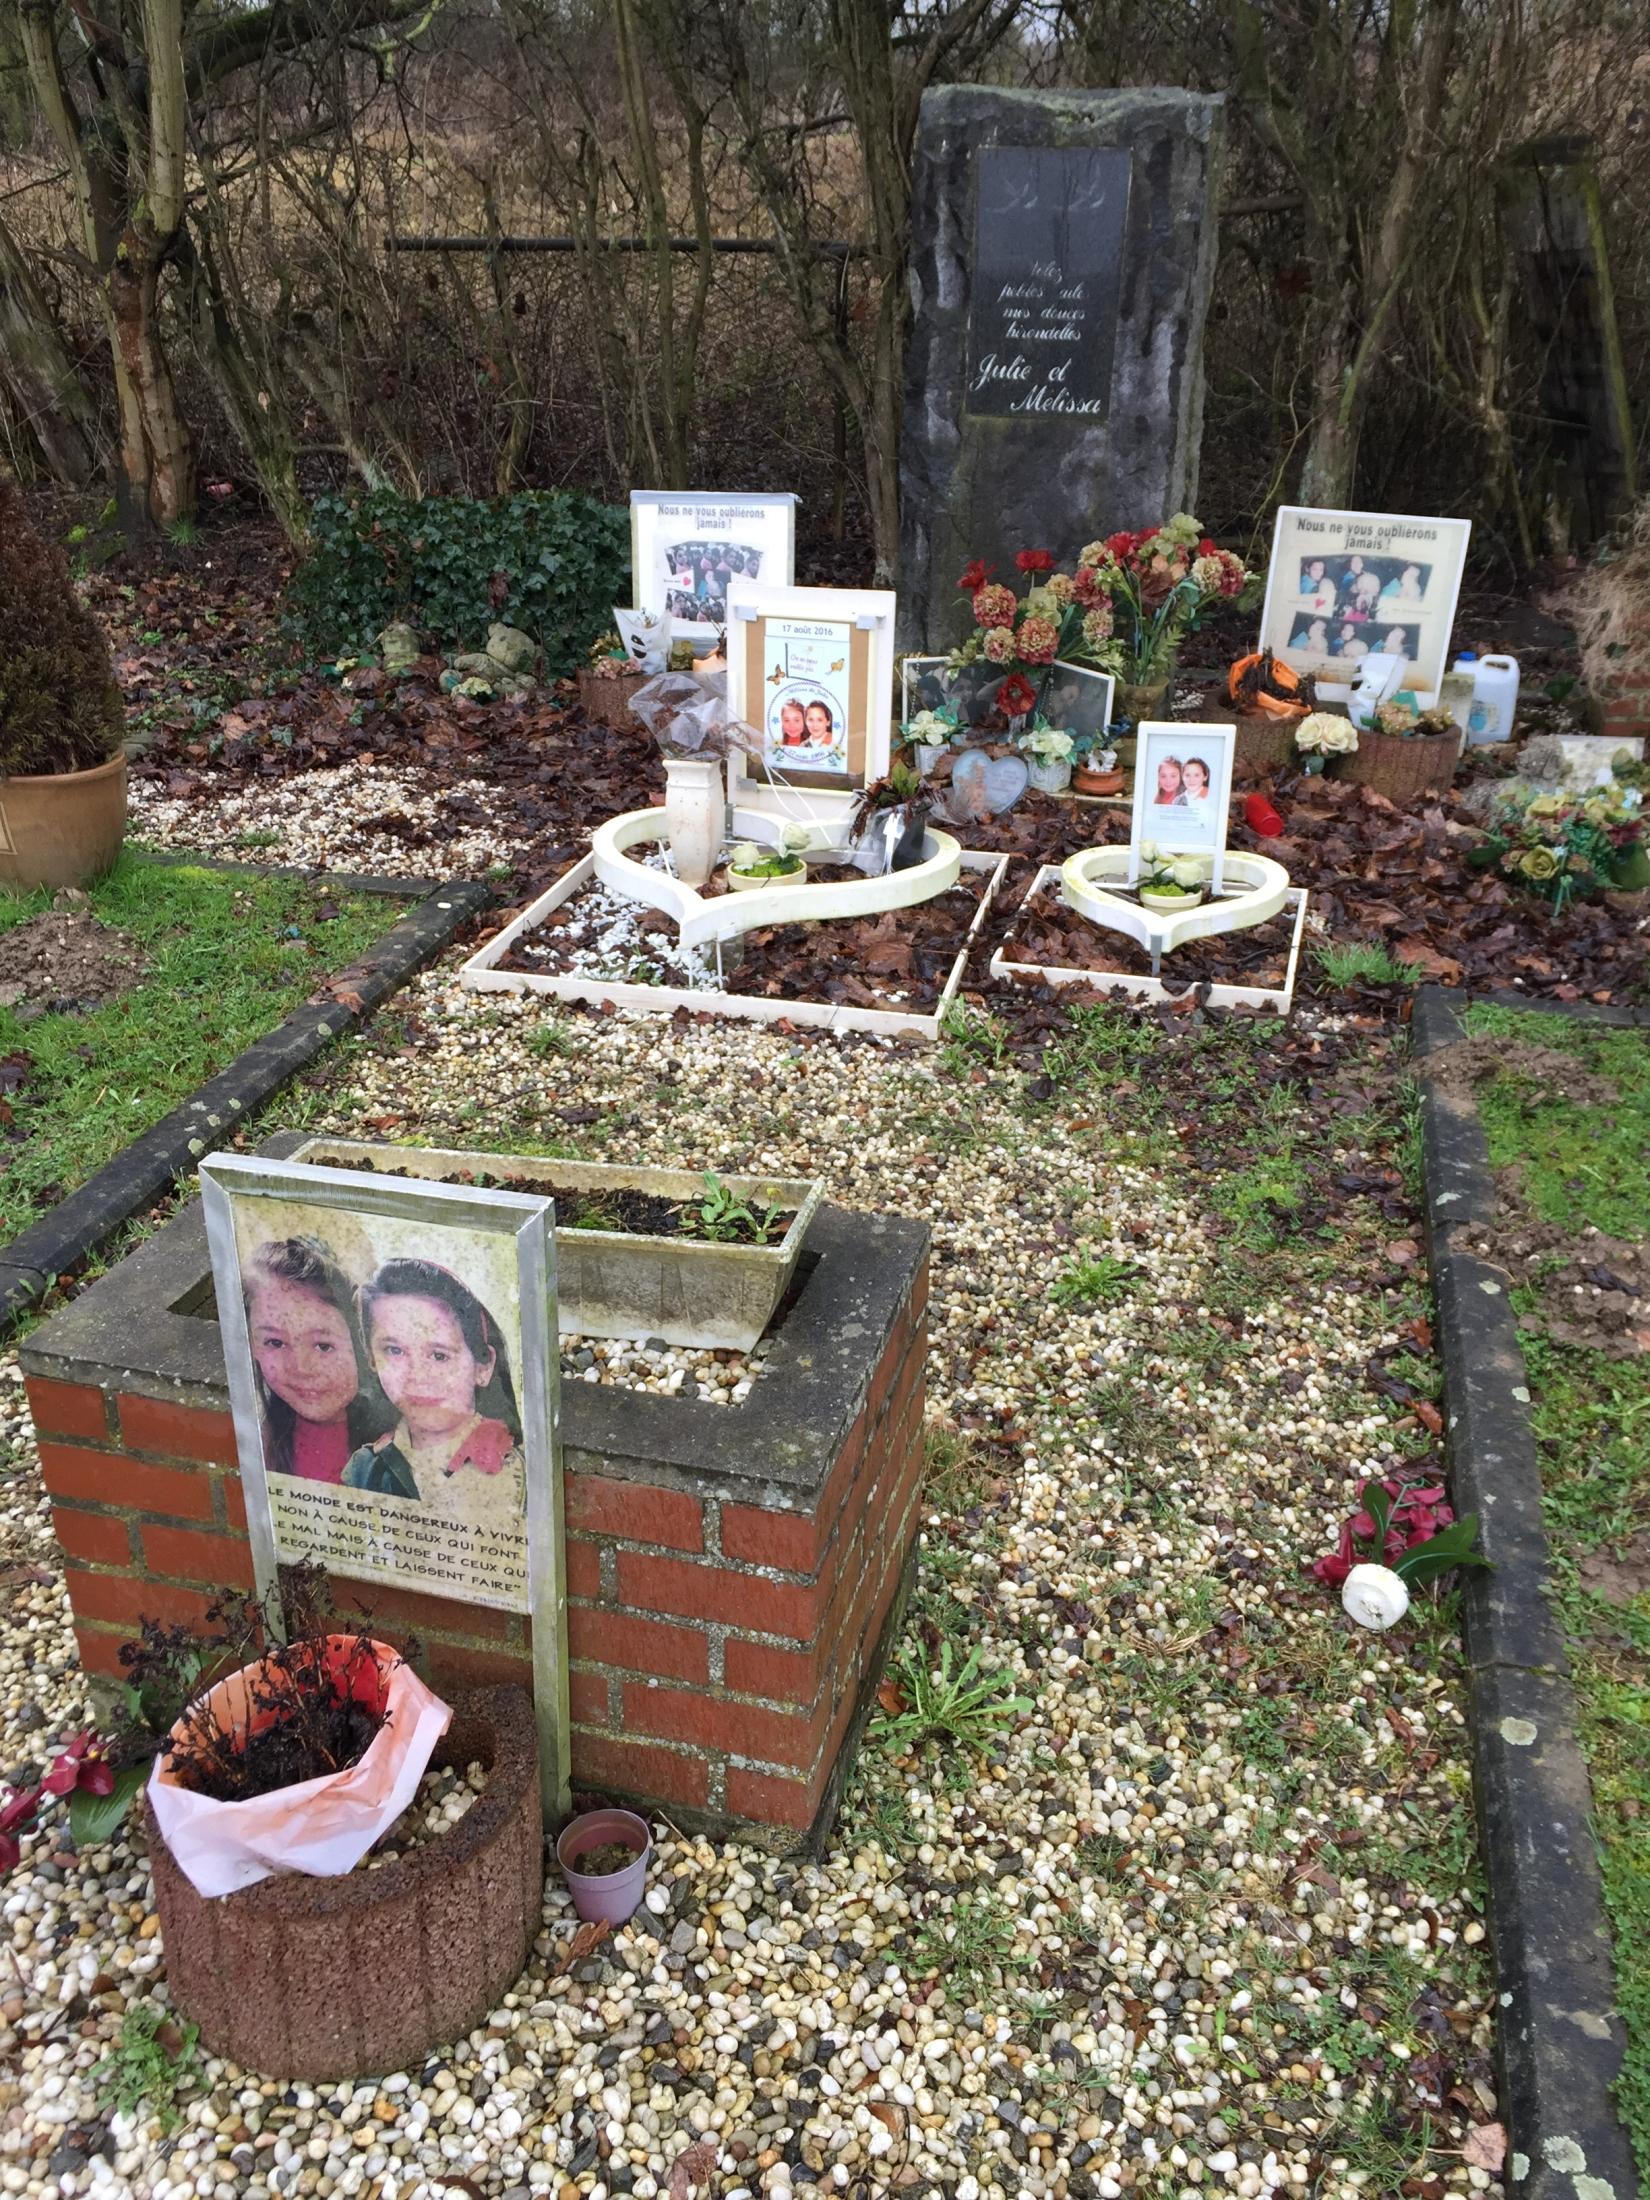 TURNING POINT: Julie Lejeune and Melissa Russo were only eight when they were killed by sexual abuser Marc Dutroux. The case led to a major change in the way missing persons reports and alerts were handled in Europe. Photo: LARS CHRISTIAN WEGNER.